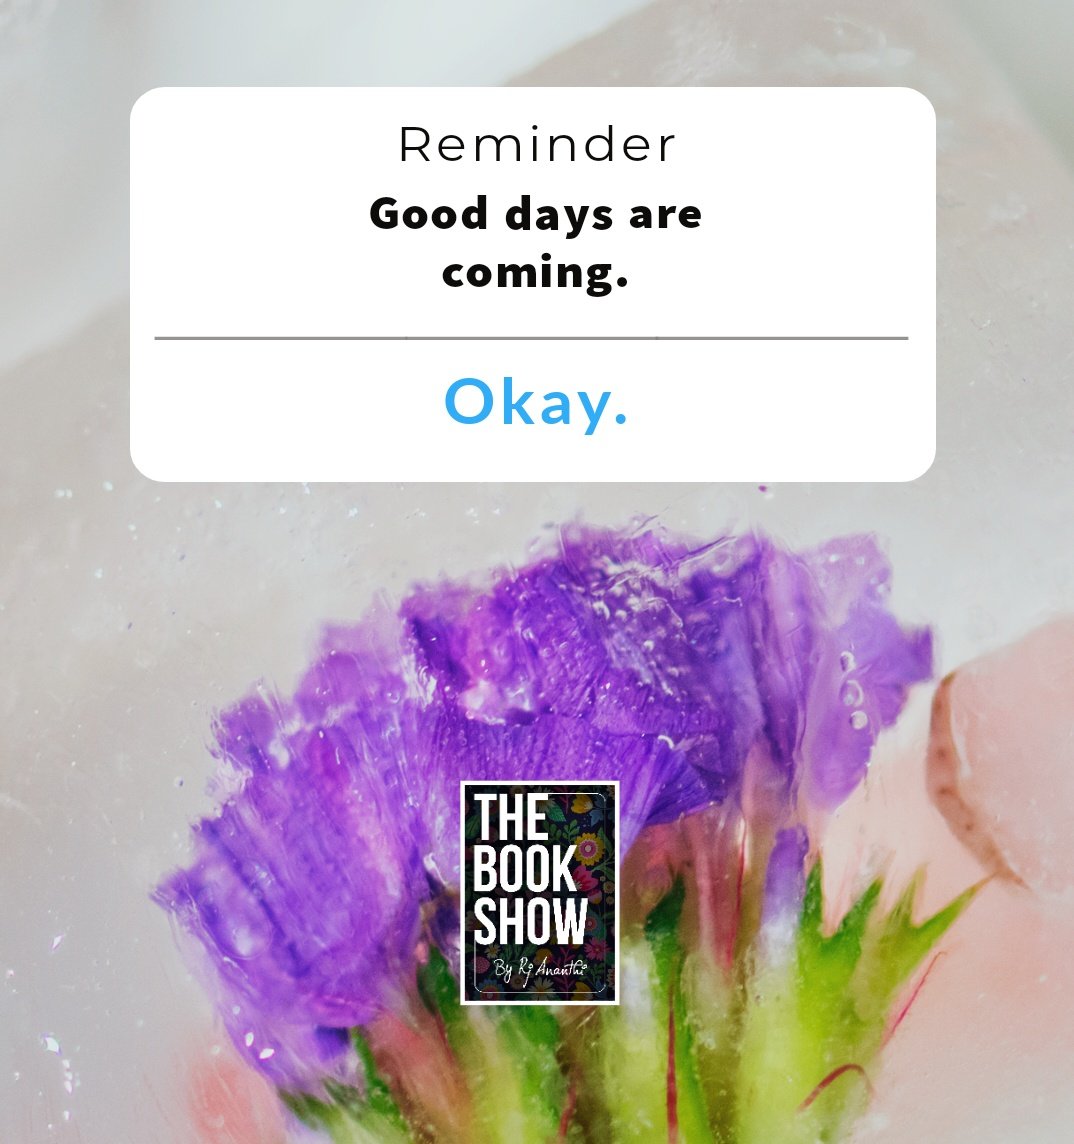 #KuttyReminder
Wishing you all goood day today. Today's gonna be yours 💗🤌
.
.
#TheBookShow #rjananthi #goodthoughts #Bookstagram #bookcommunity #bookblogger #booktuber #Bookfluencer #reading #readersofinstagram #readwithus #booktwitter